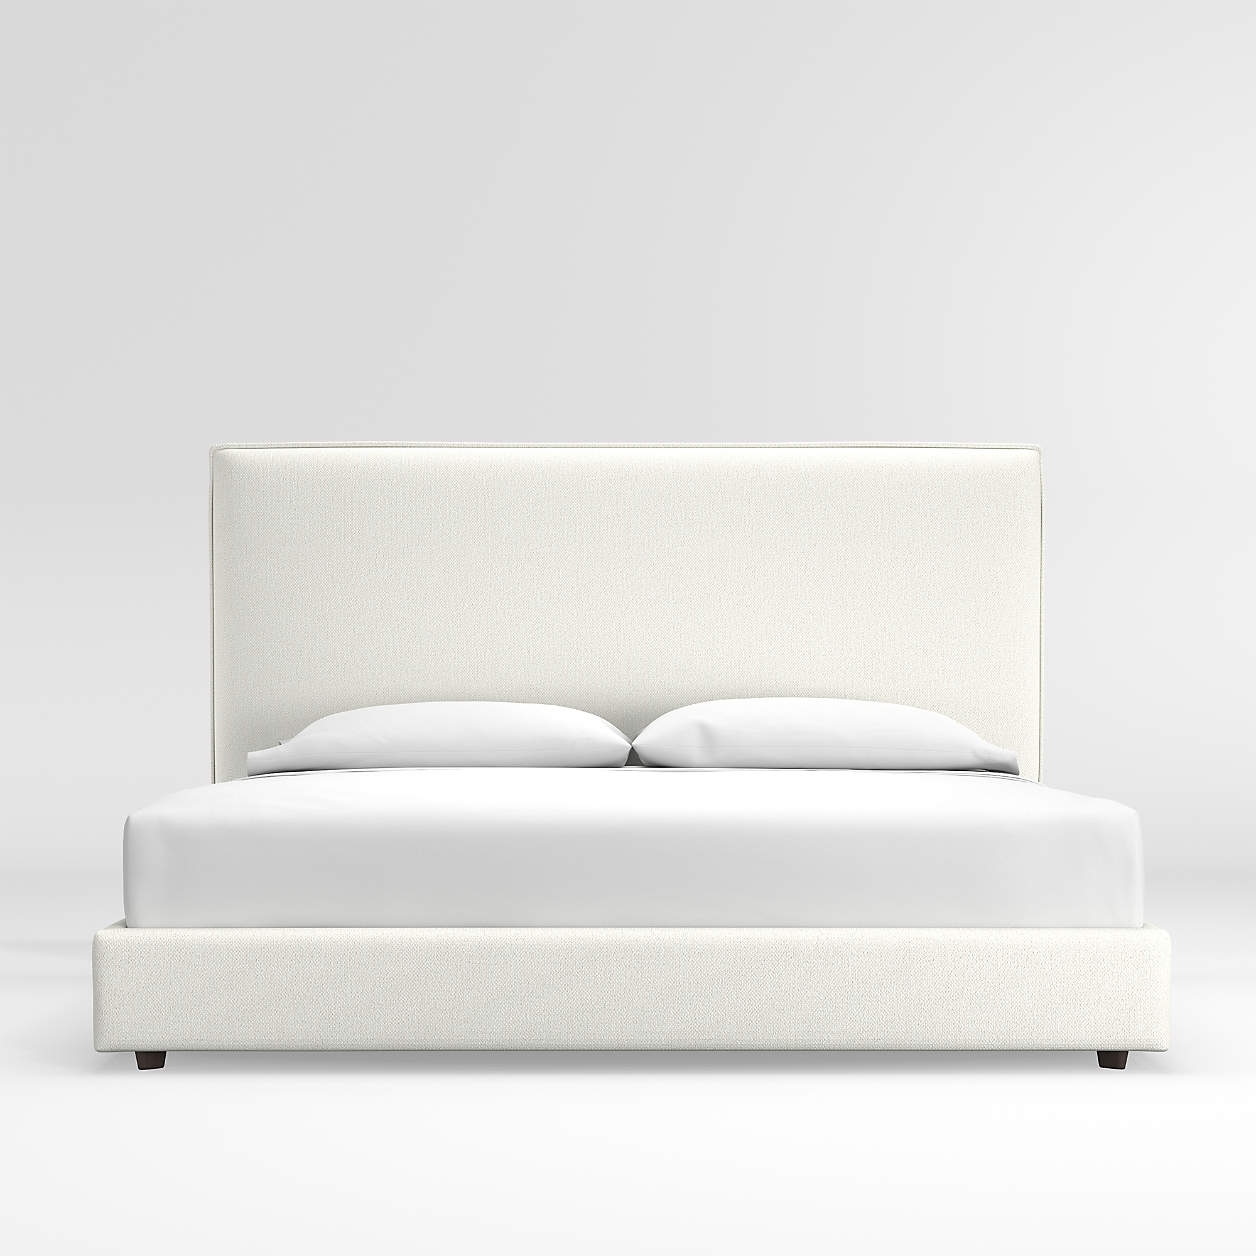 Lotus Upholstered King Bed with 53.5" Headboard - Image 1